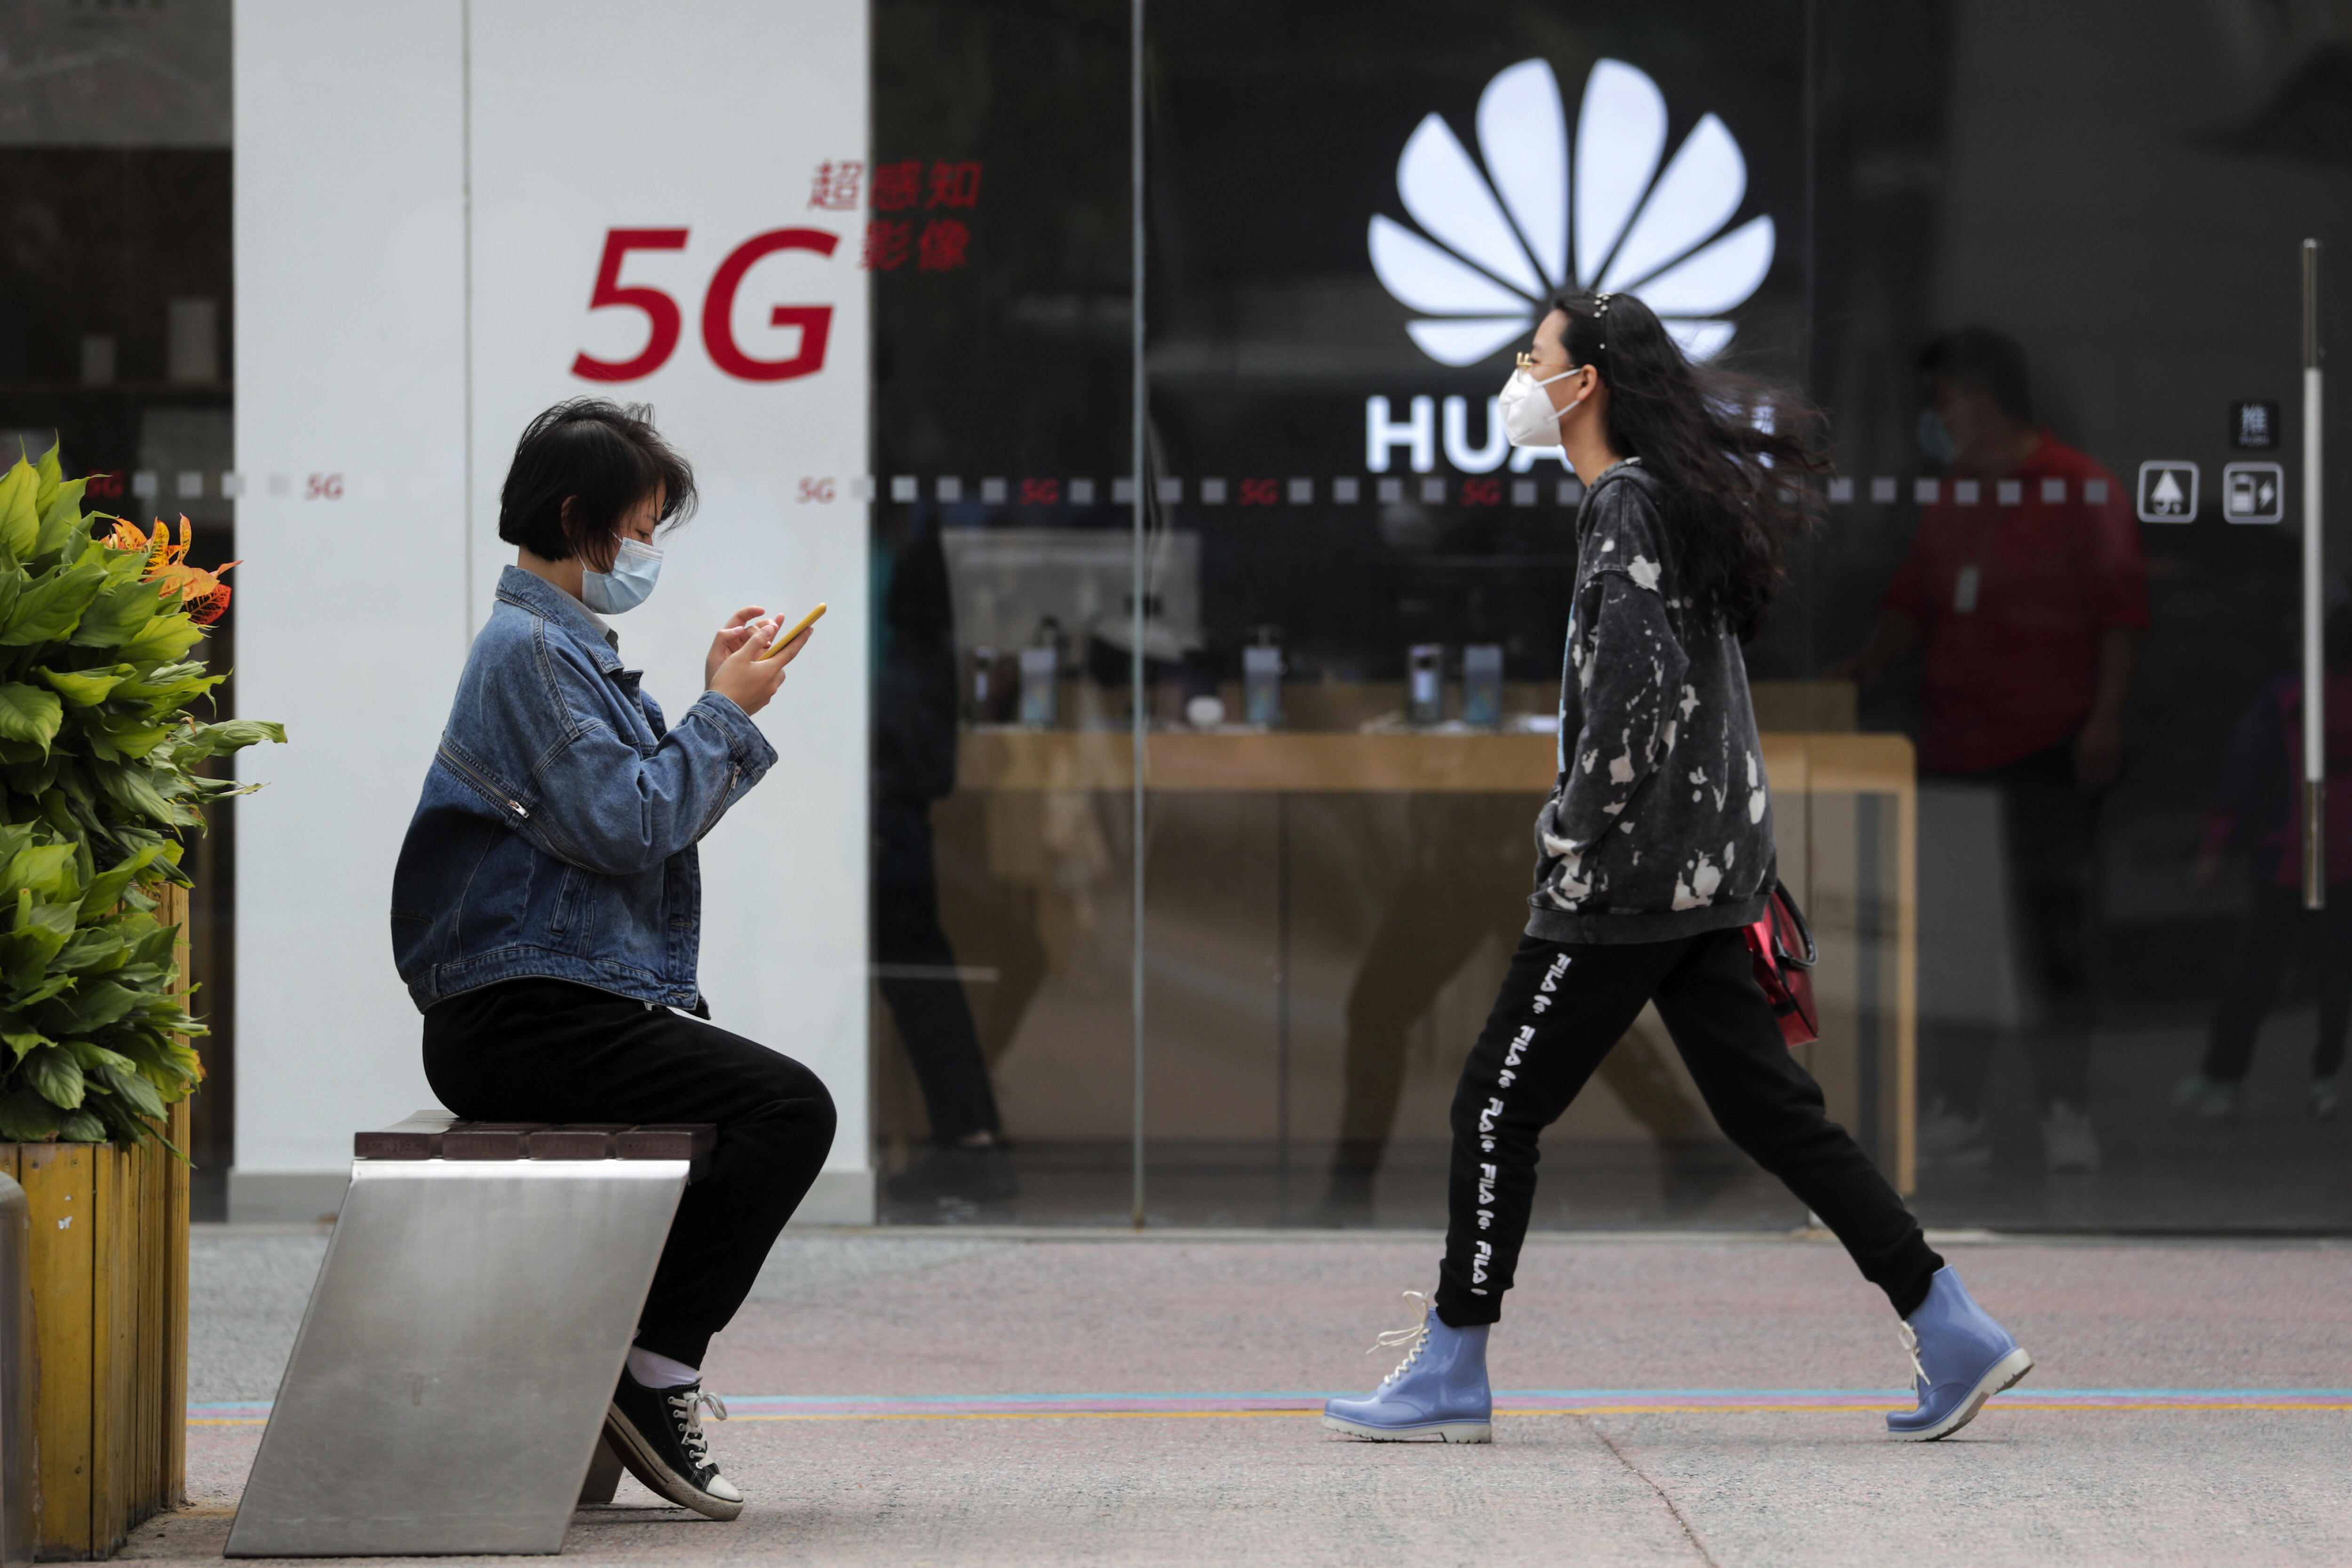 Huawei is putting more focus on cloud as US sanctions hit its smartphone and network businesses. Photo: AP